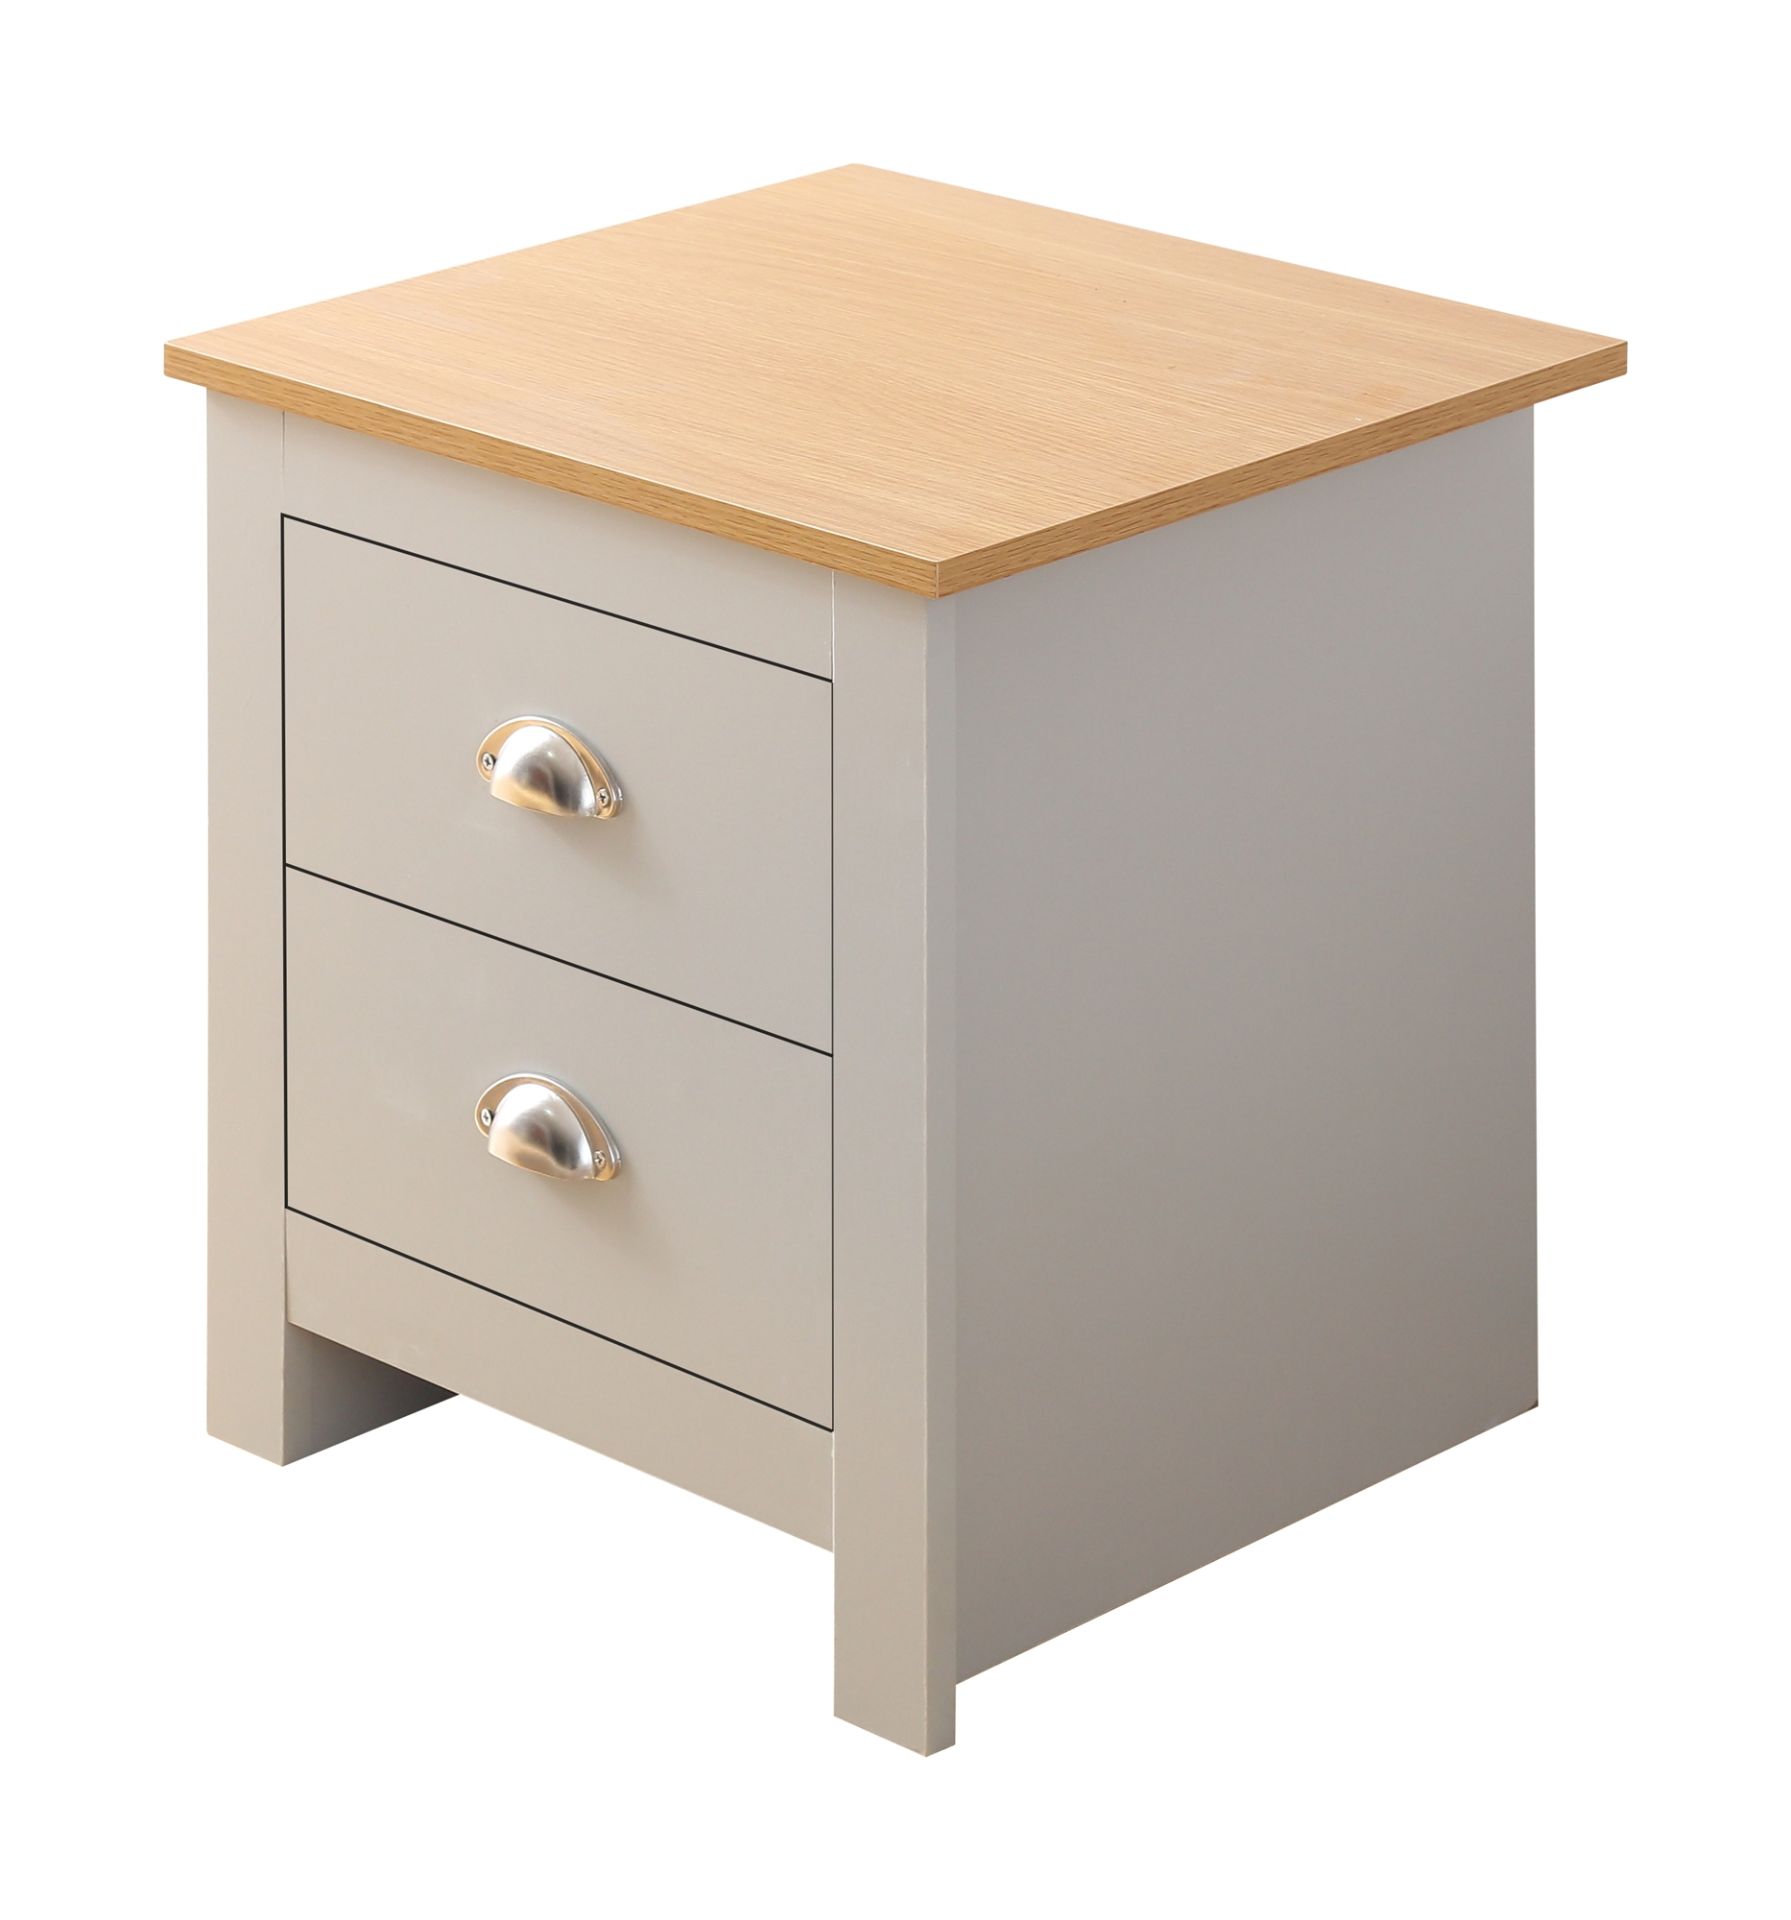 PAIR OF GREY WITH OAK TOP SHAKER-INSPIRED STYLISH DESIGN BEDSIDES - Image 3 of 4